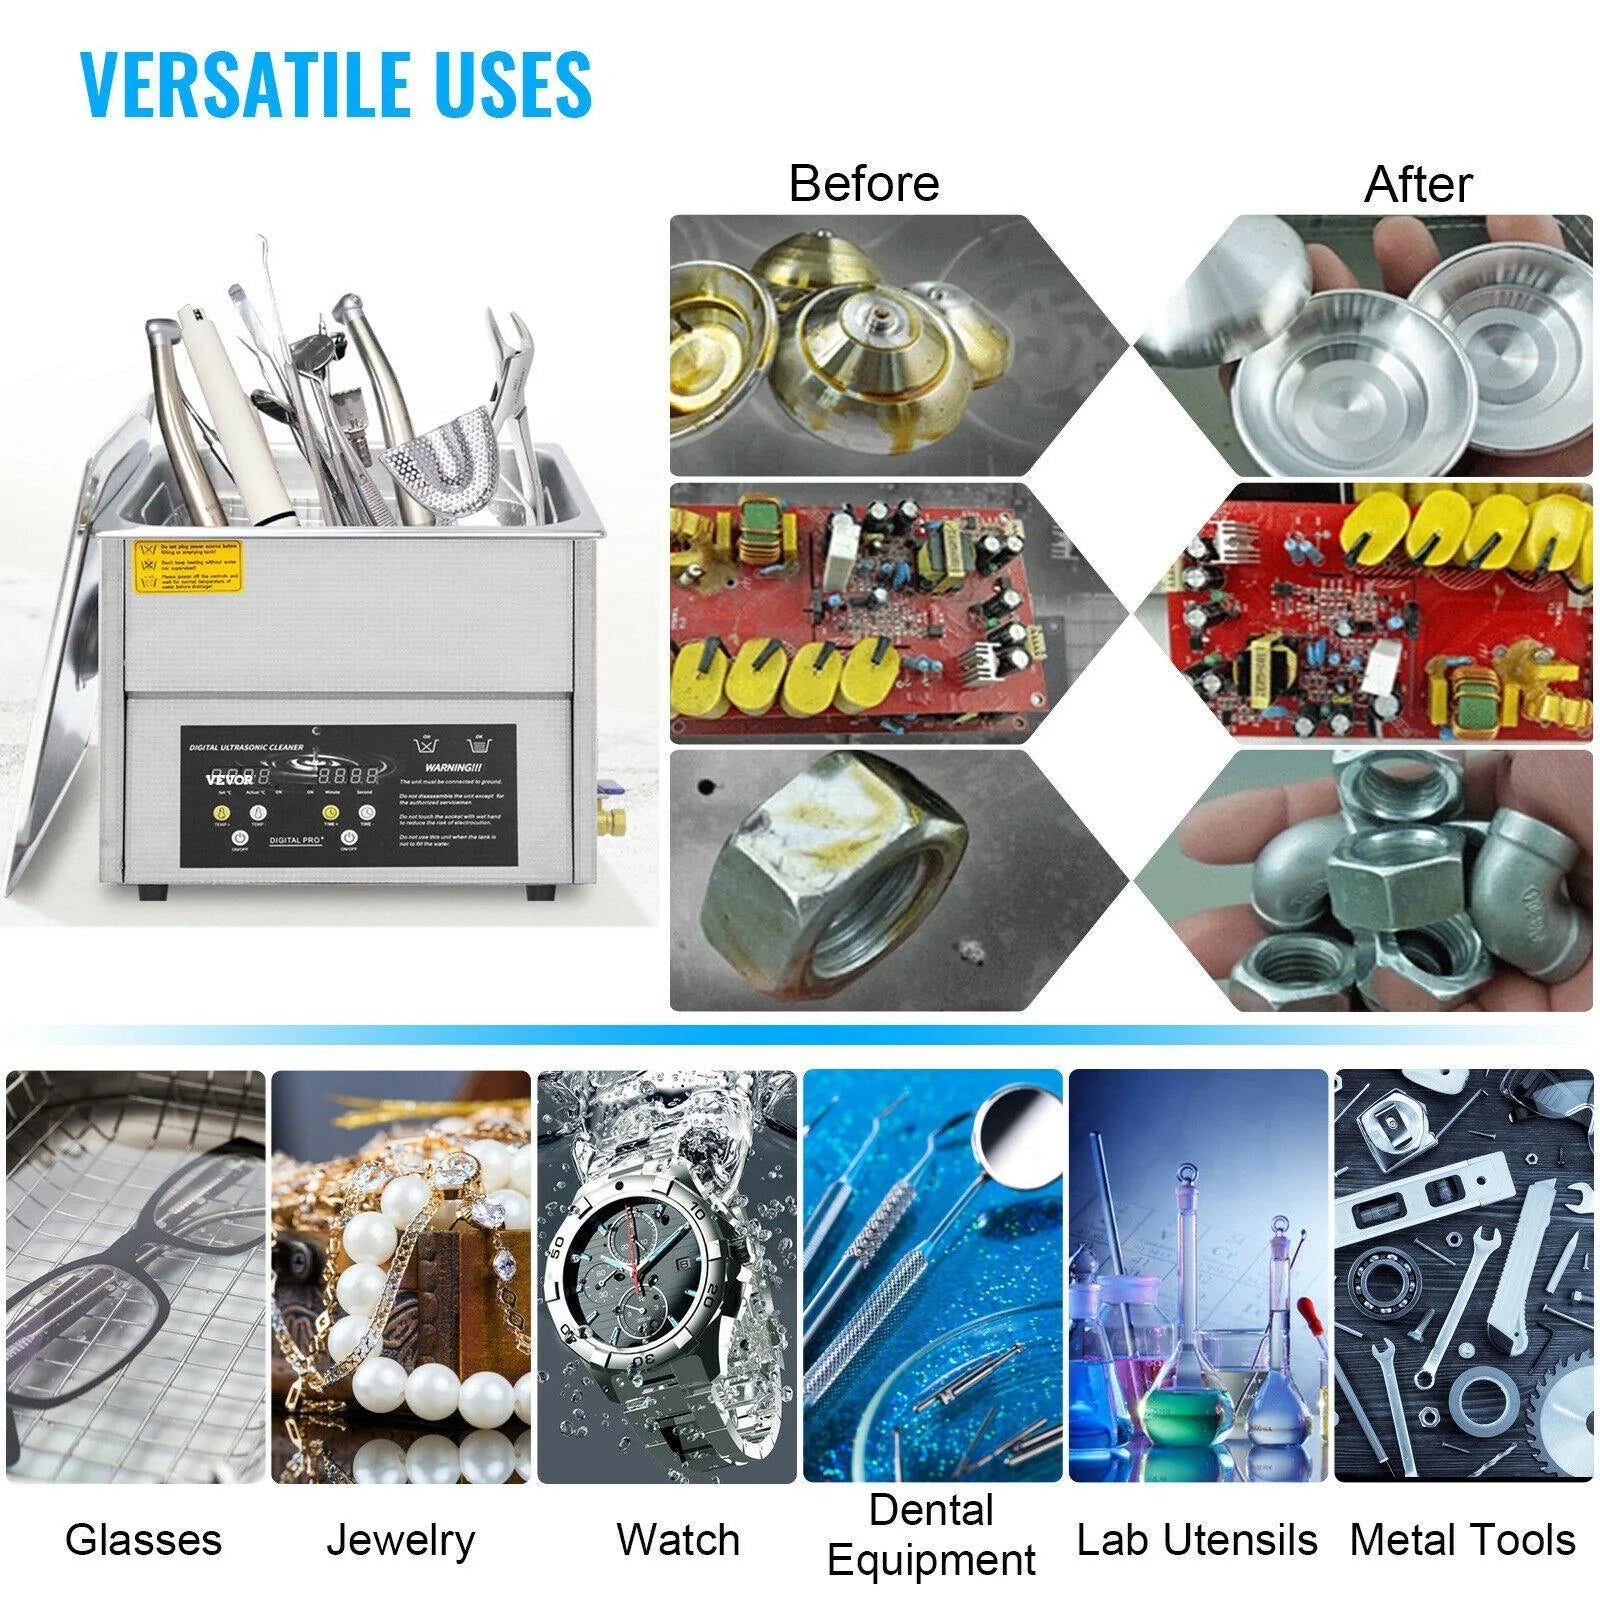 Portable Ultrasonic Stainless Steel Cleaner 3L 6L 10L with Degassing Function - Buy Confidently with Smart Sales Australia